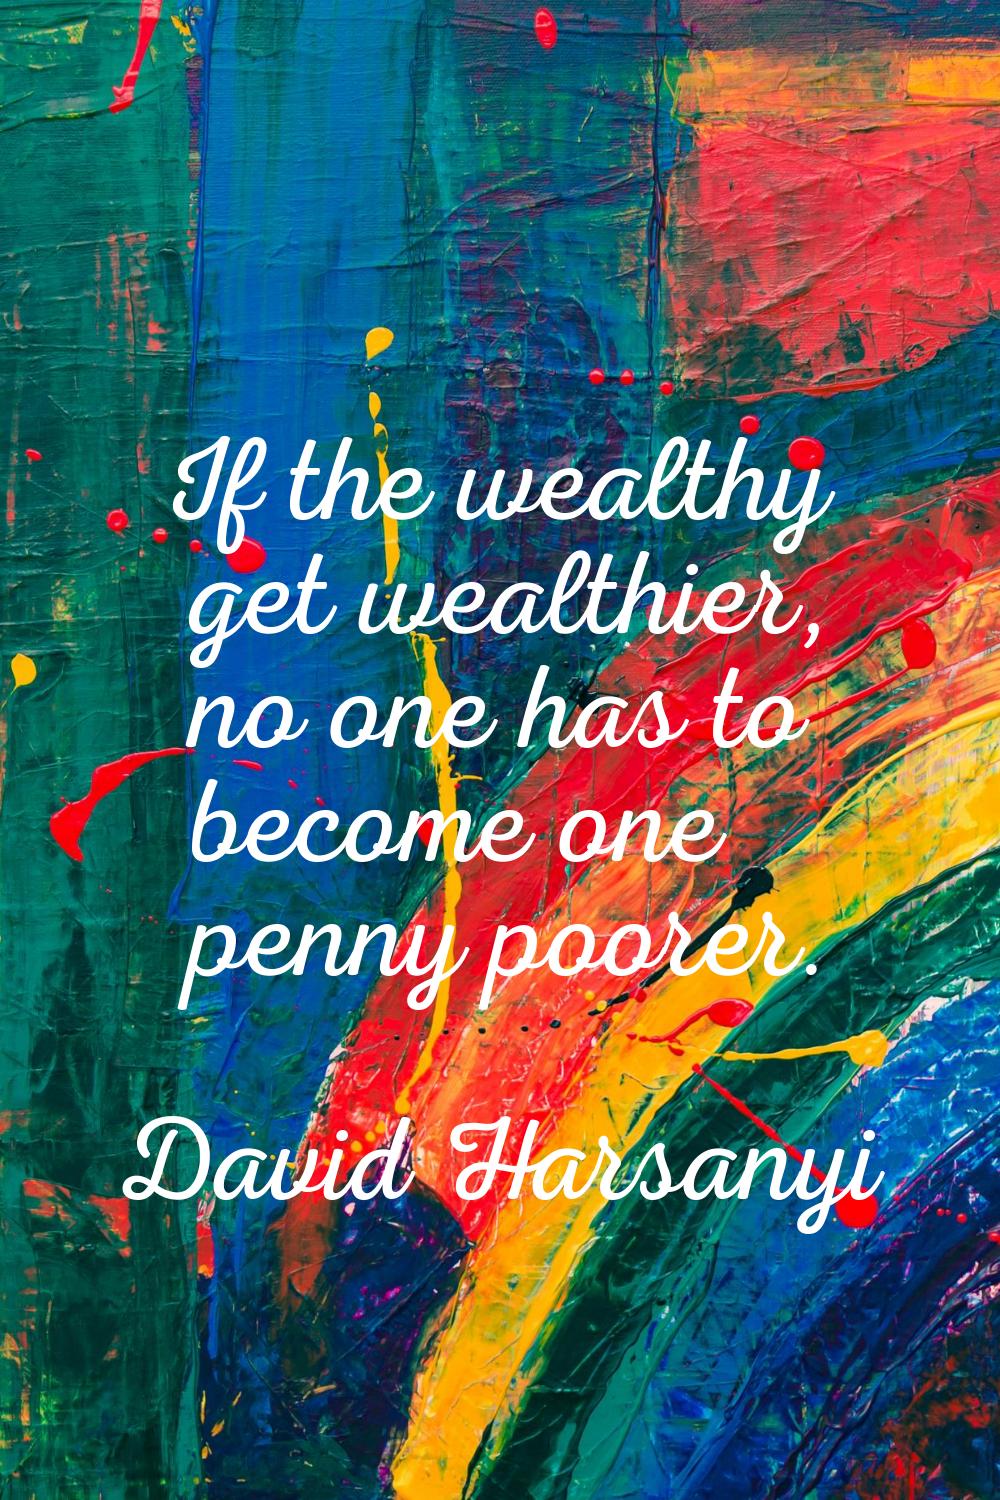 If the wealthy get wealthier, no one has to become one penny poorer.